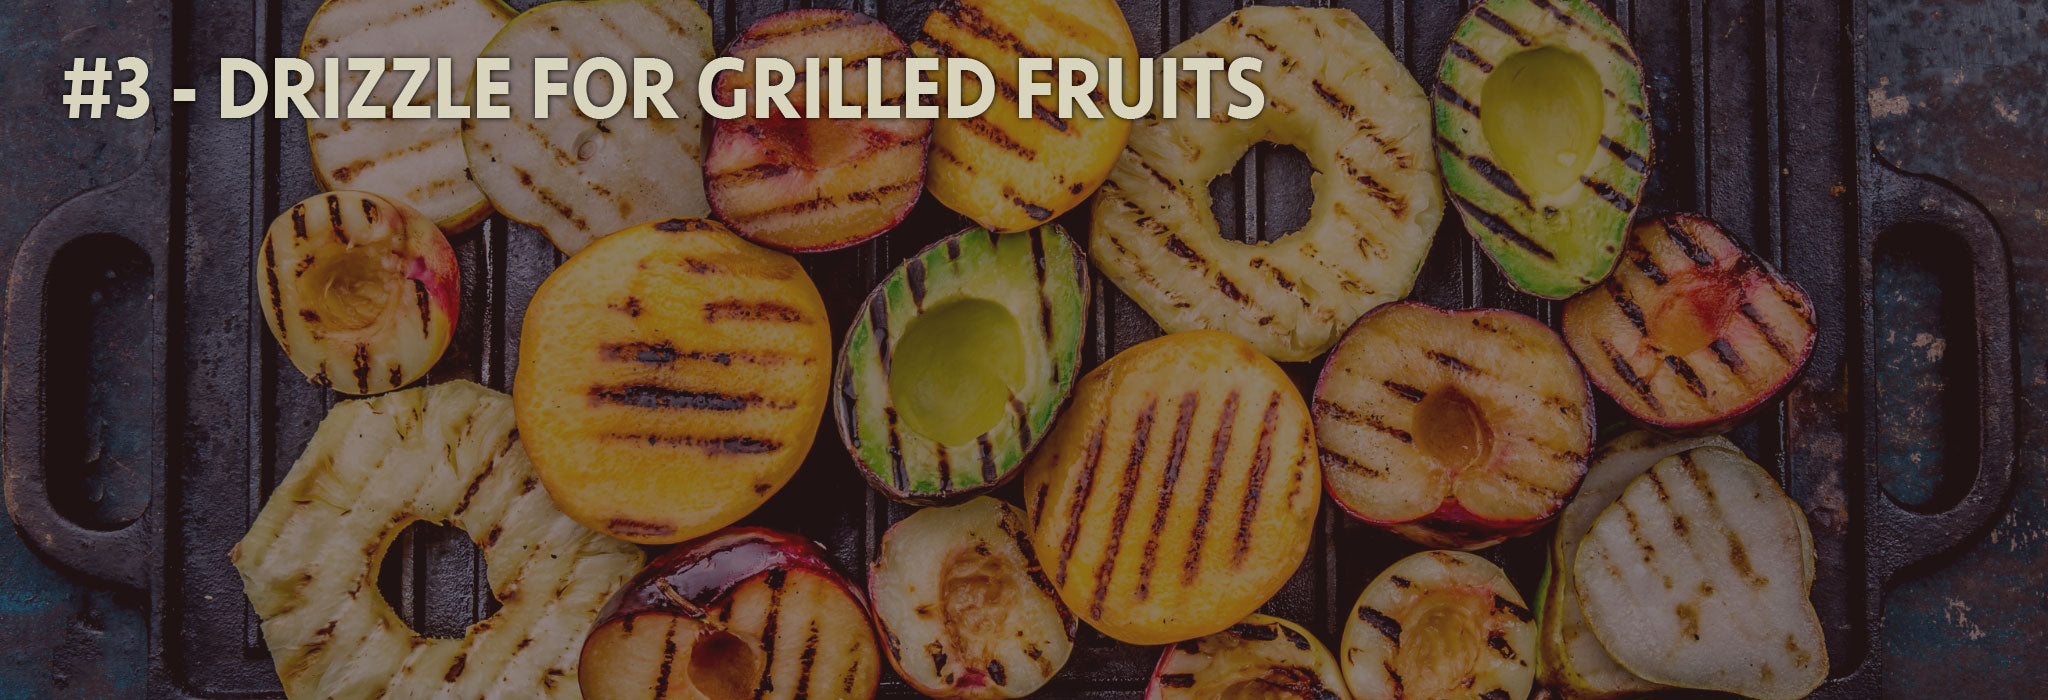 Use Papa Vince Salad Dressing for Drizzling Grilled Fruit